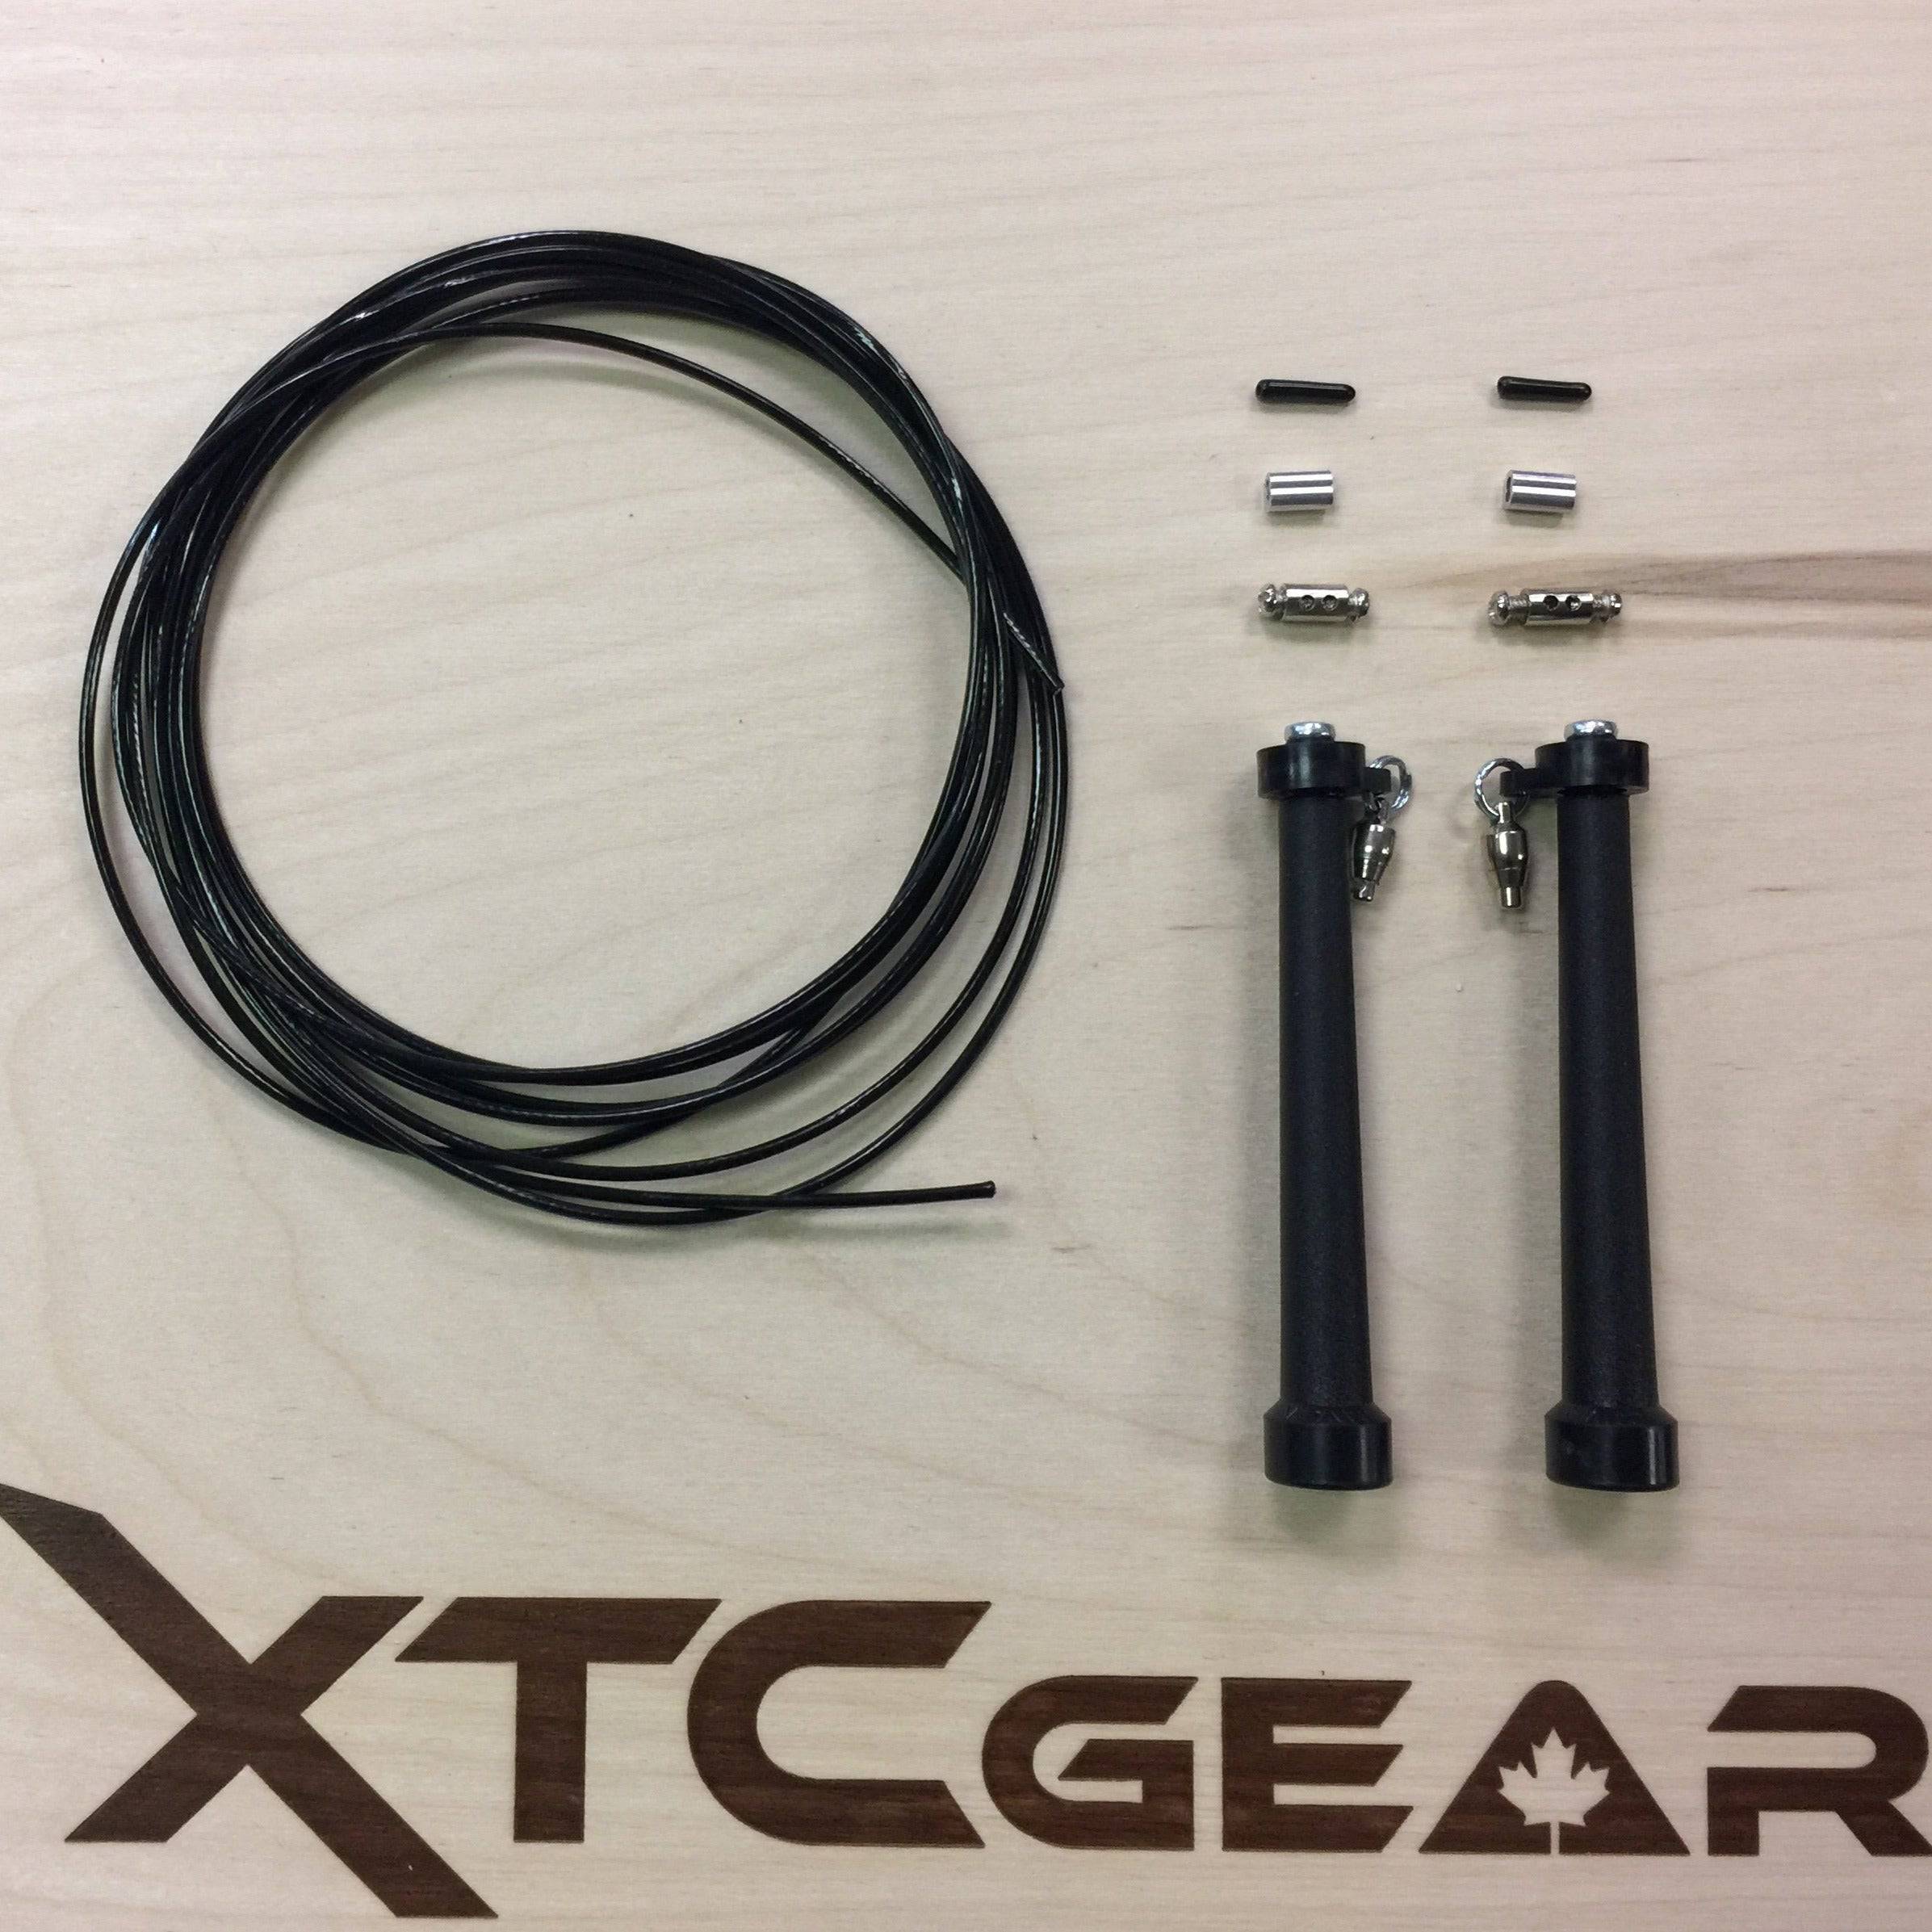 XTC Gear | X-Series Speed Rope - R1 - XTC Fitness - Exercise Equipment Superstore - Canada - Jump Ropes